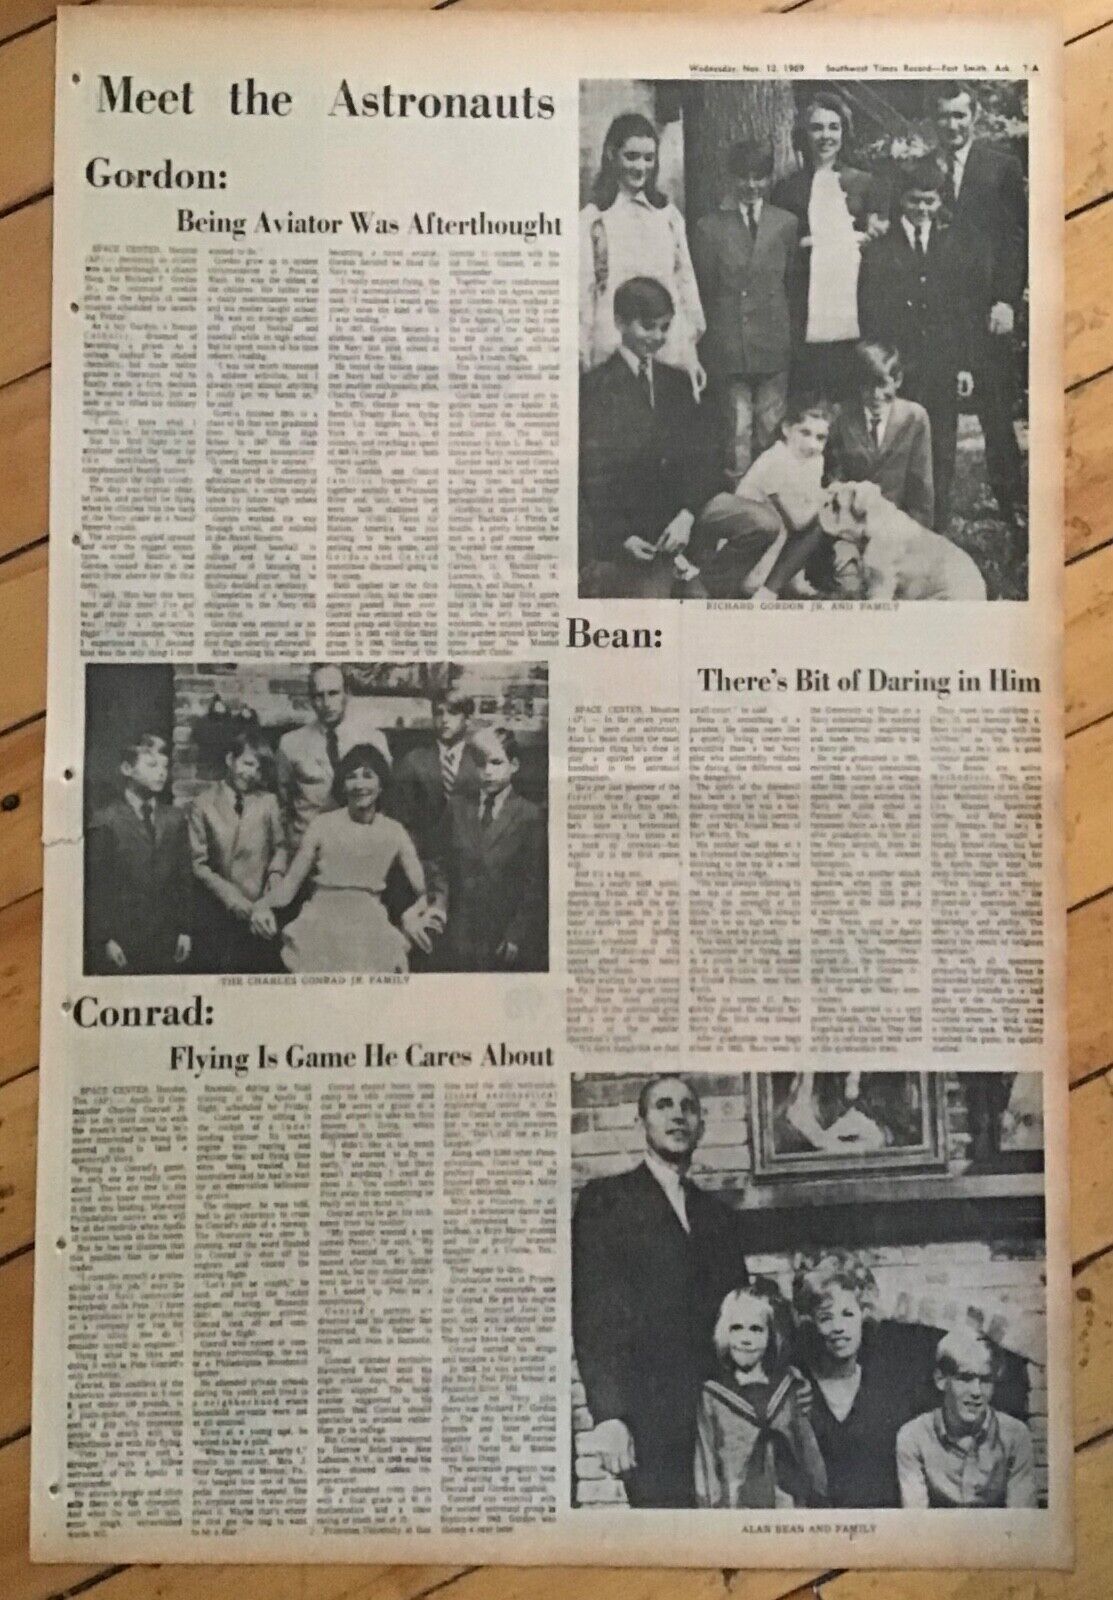 1969 full page newspaper feature -Meet The Astronauts of Apollo 12 & families